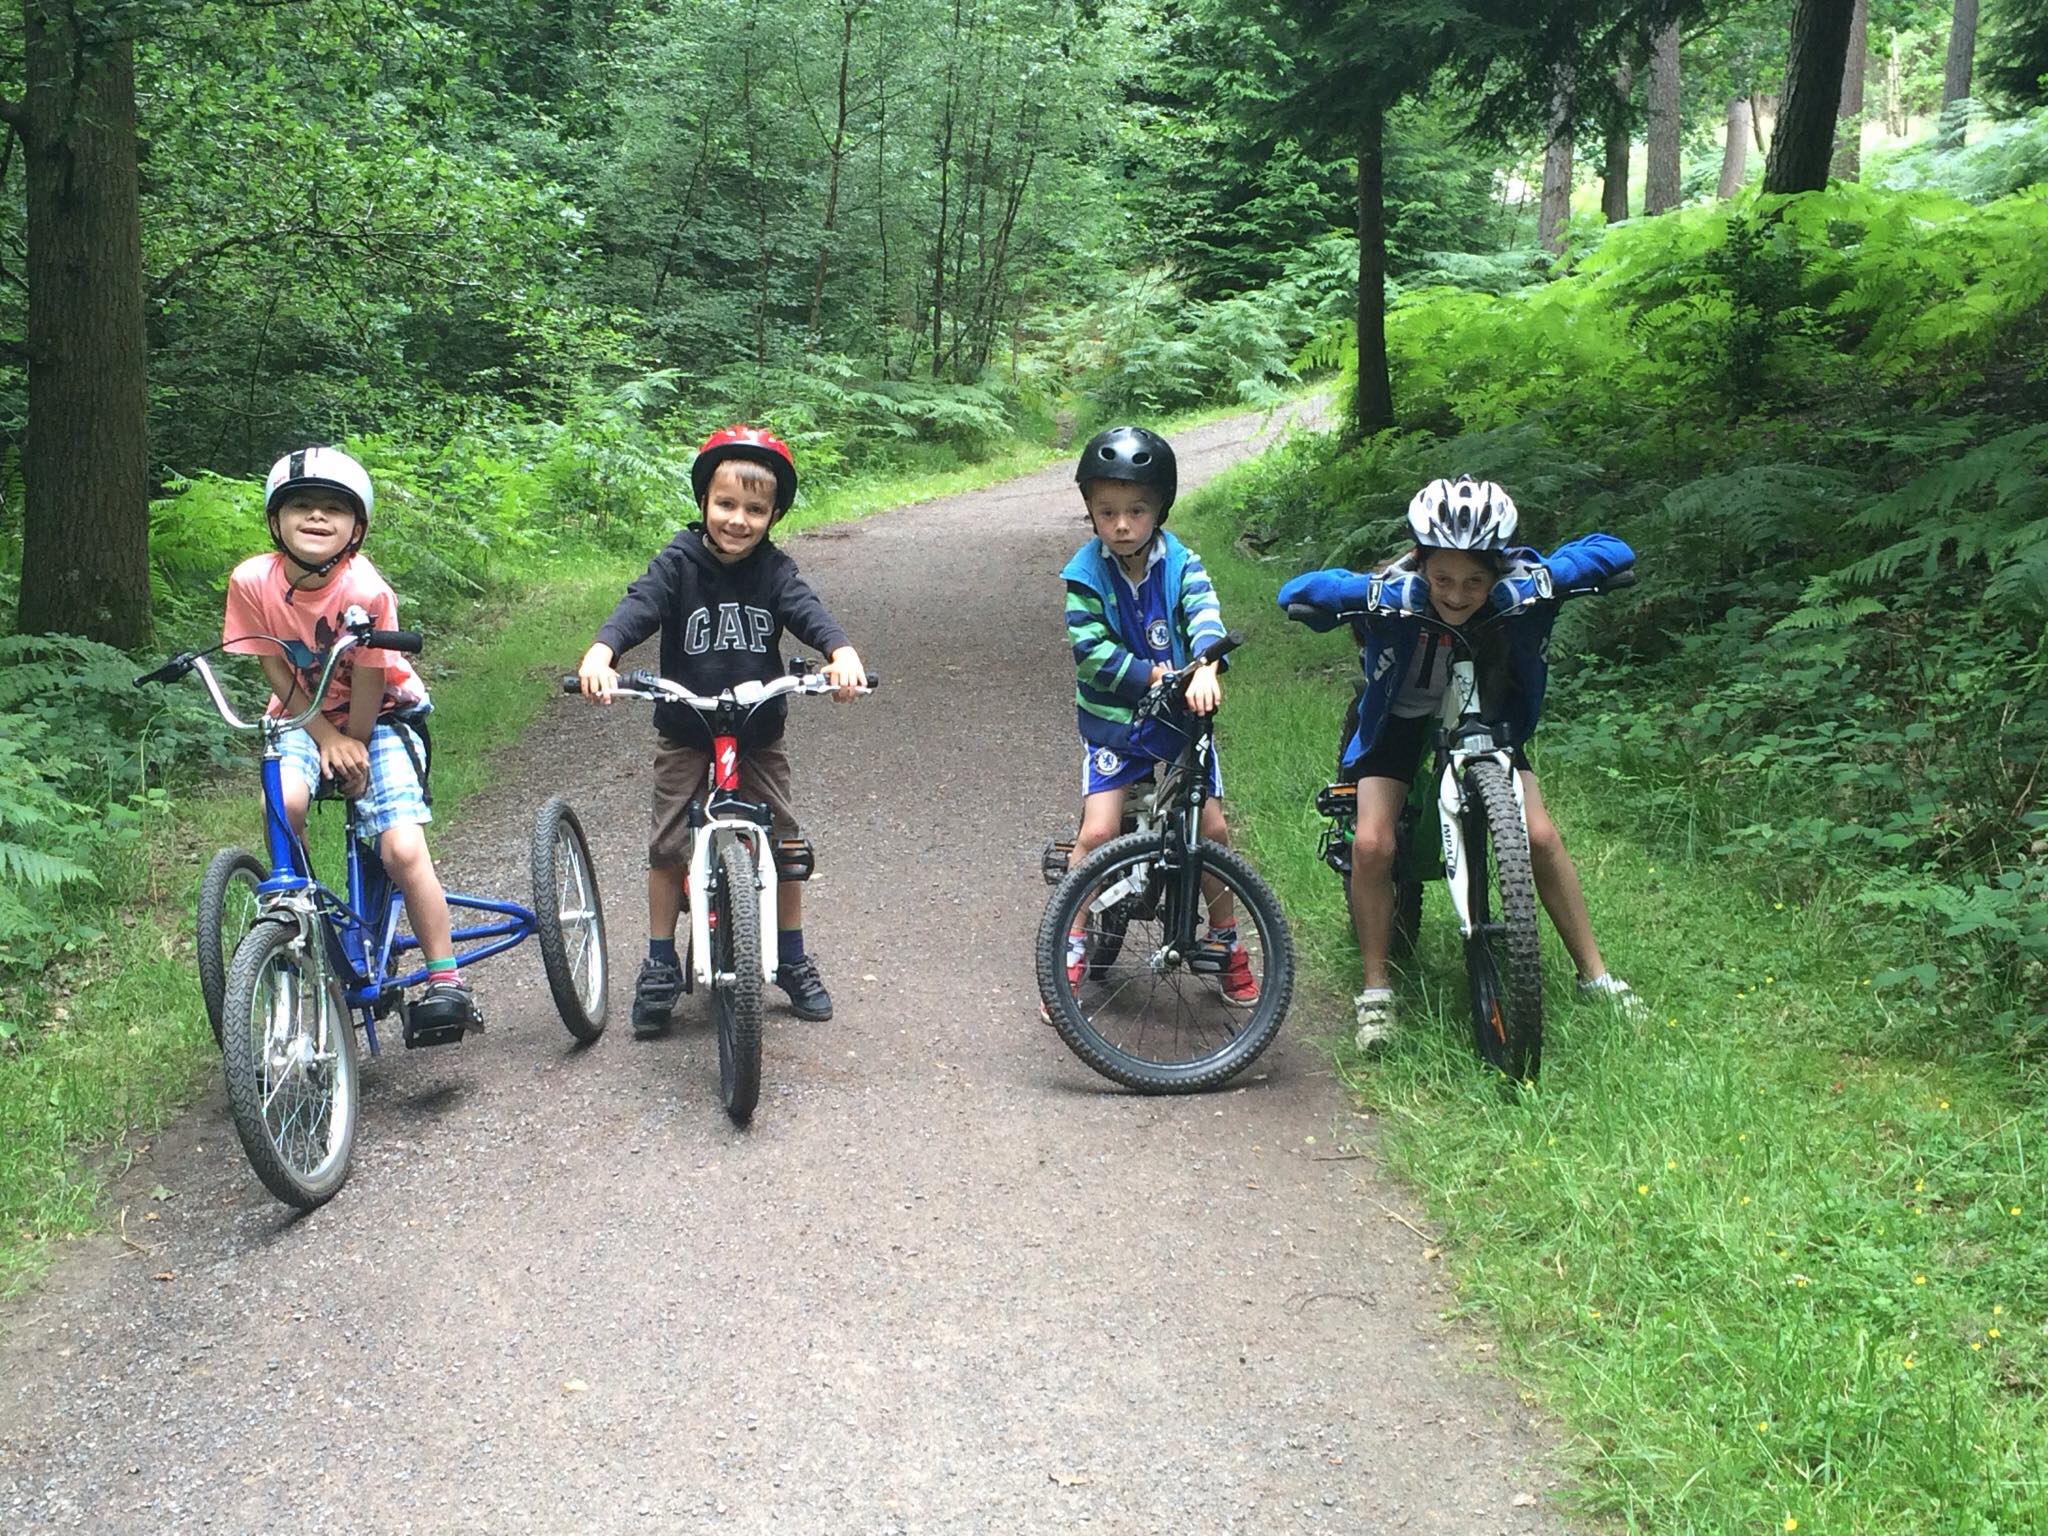 Four children on a forest cycling trail, all with bikes. Joe is on the left on a Tomcat trike. They are all smiling at the camera.